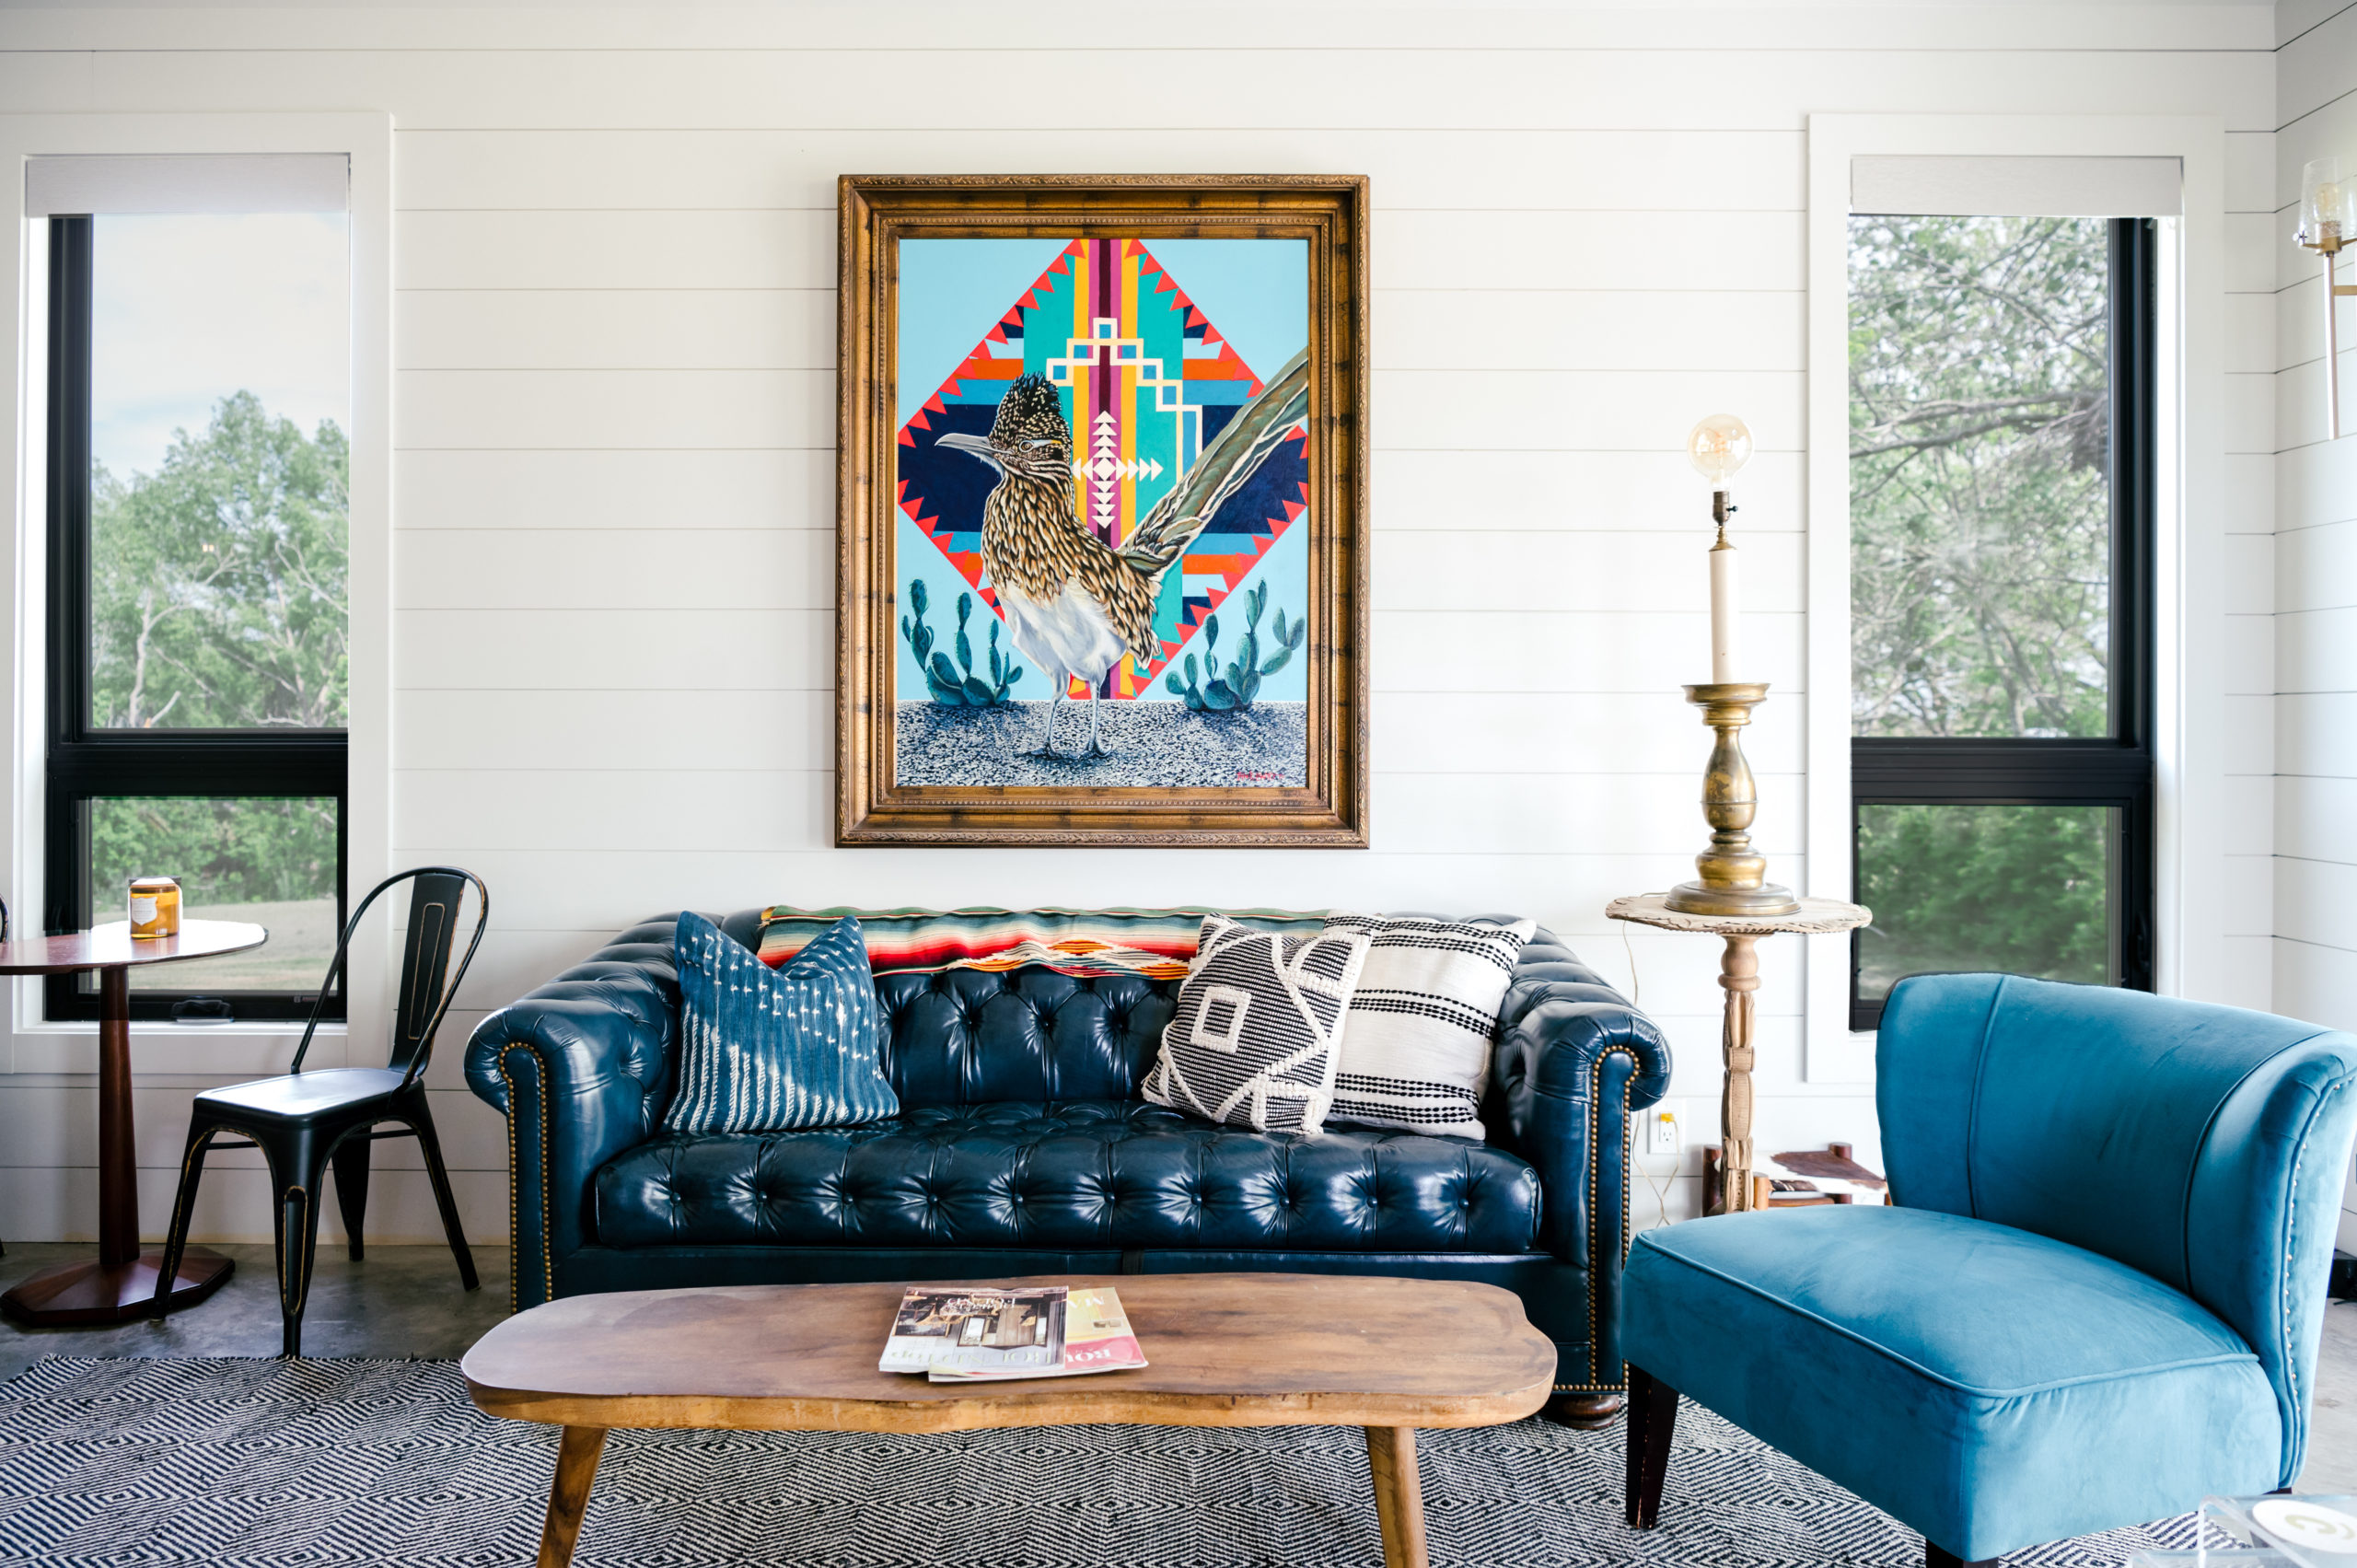 Well lit room with blue leather couch, blue velvet love seat and western art hanging on the wall